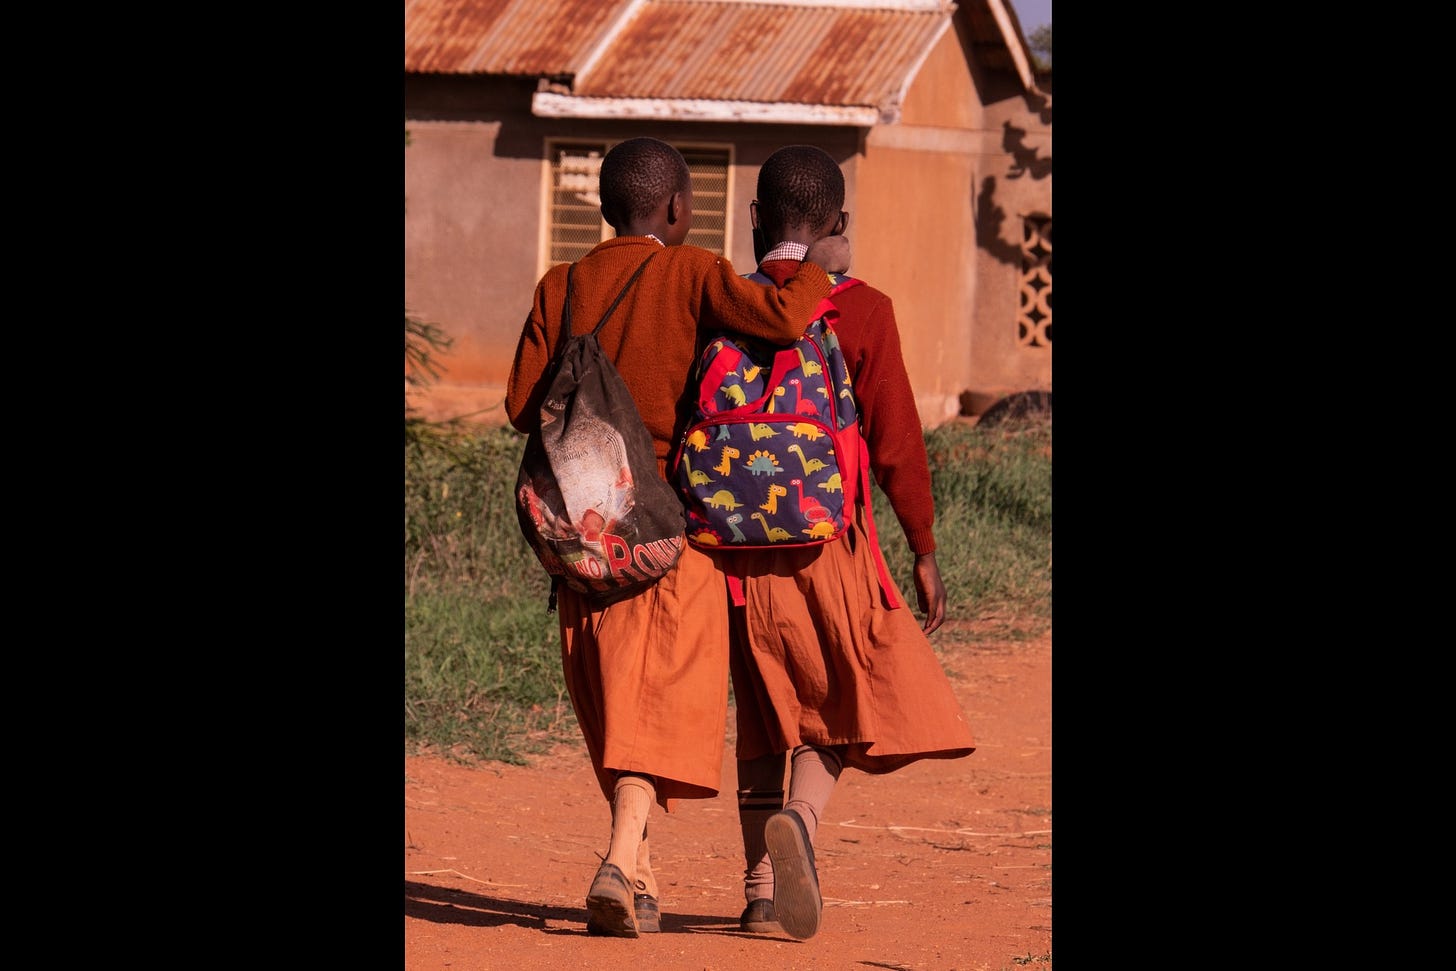 Two preteen African girls dressed identically in a red sweater and orange skirt walk home from school. One girl has her arm around the other's shoulders. The view is from the back.